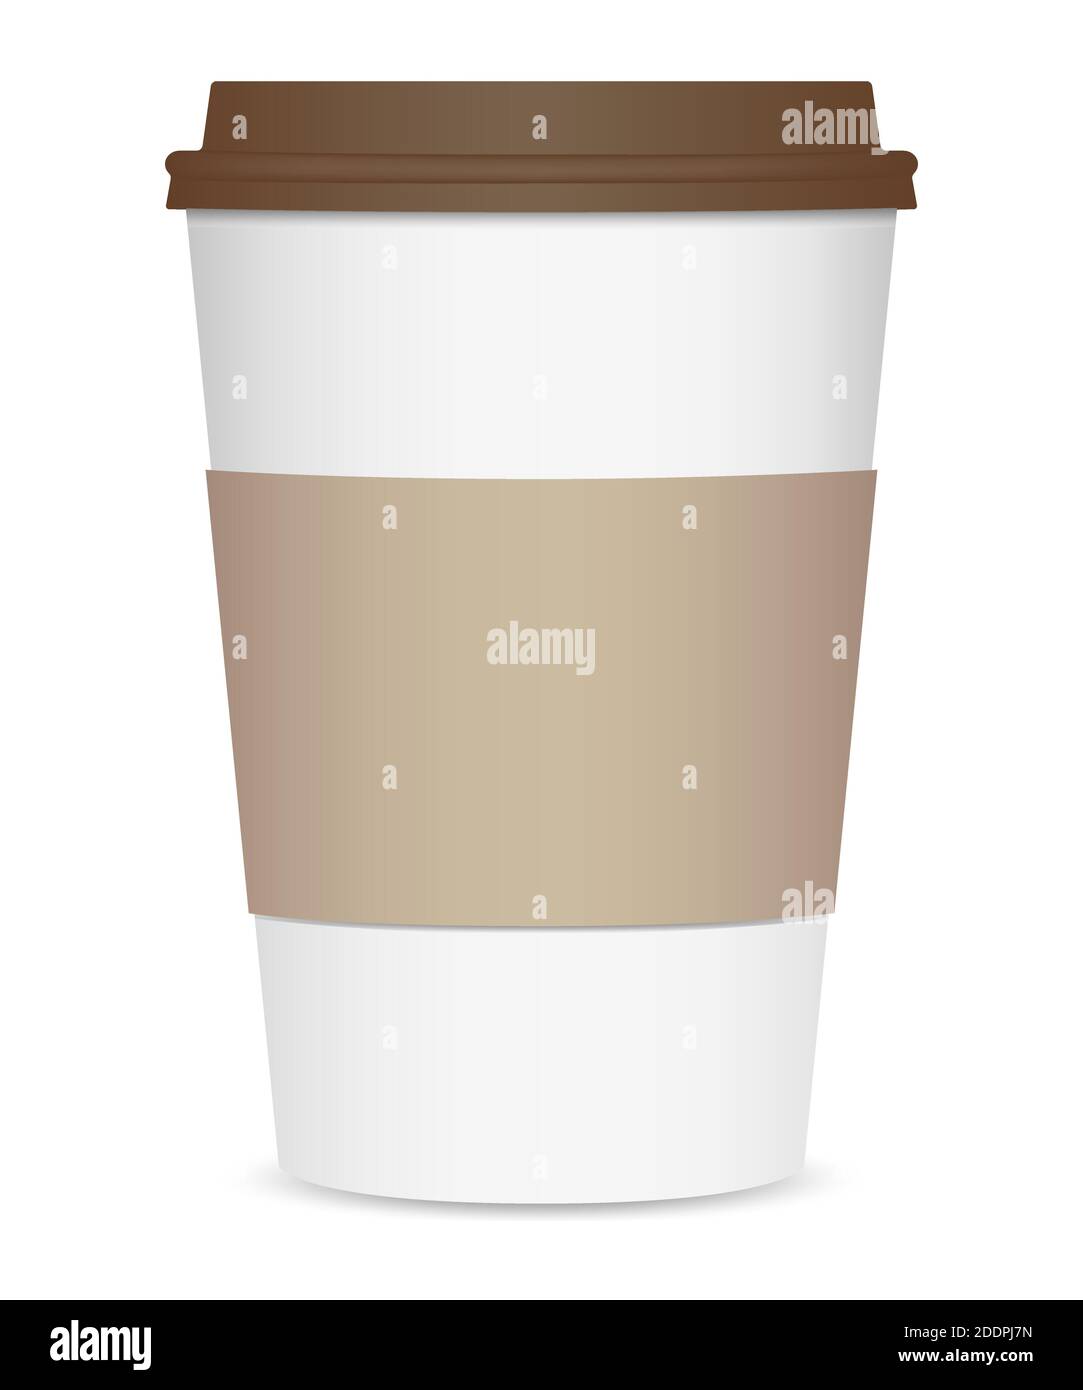 https://c8.alamy.com/comp/2DDPJ7N/layout-of-a-realistic-coffee-cup-with-a-brown-lid-and-a-cup-holder-front-view-isolated-on-white-background-vector-illustration-2DDPJ7N.jpg